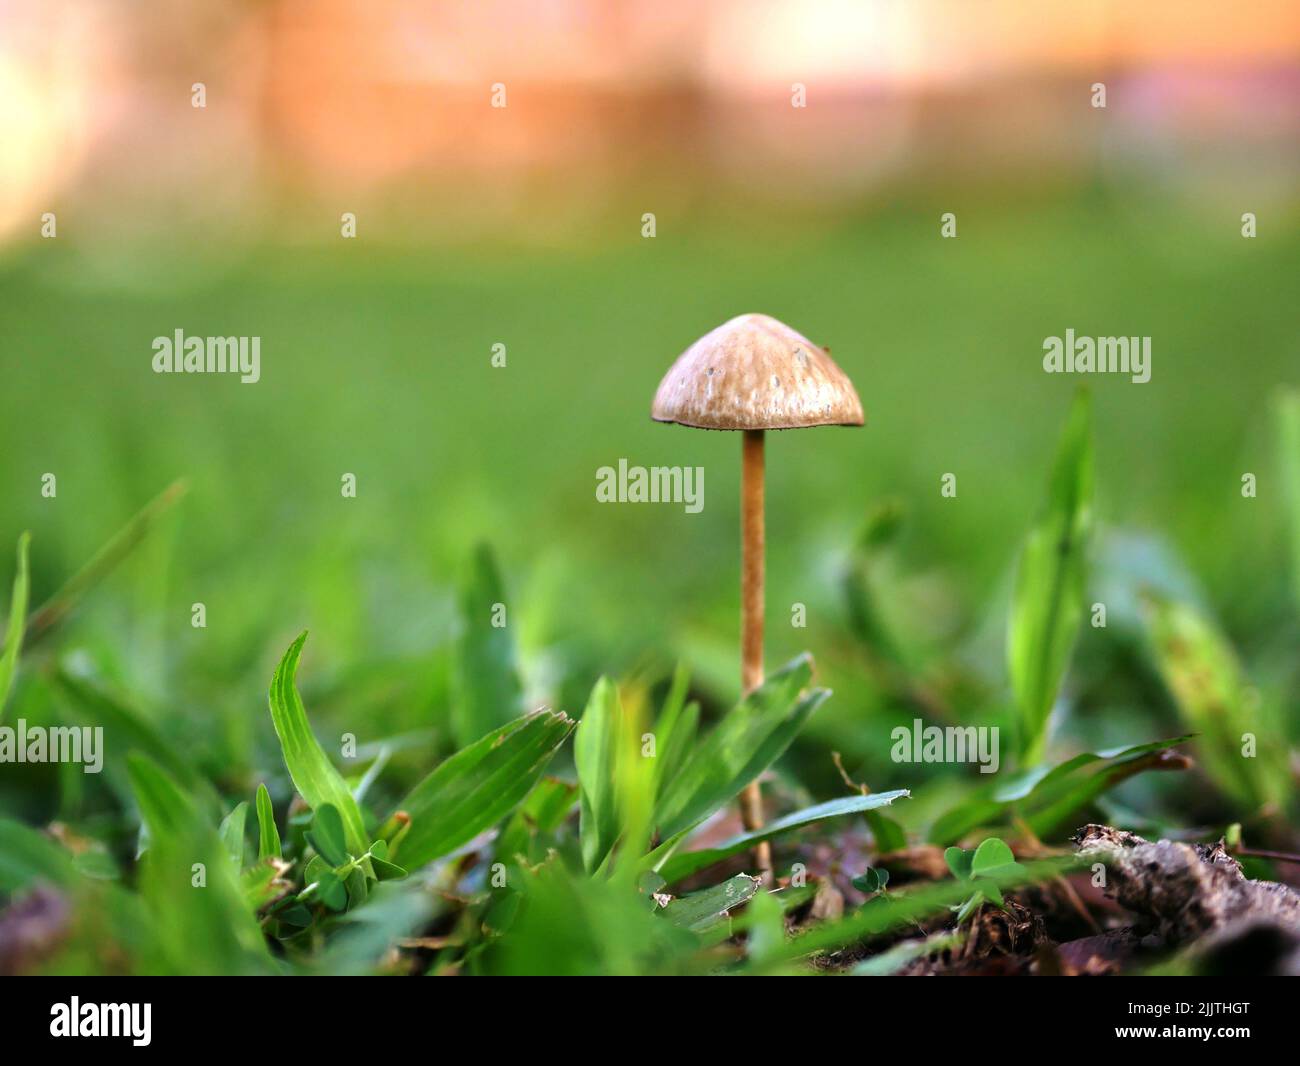 A closeup shot of a small mushroom on the blurry background Stock Photo